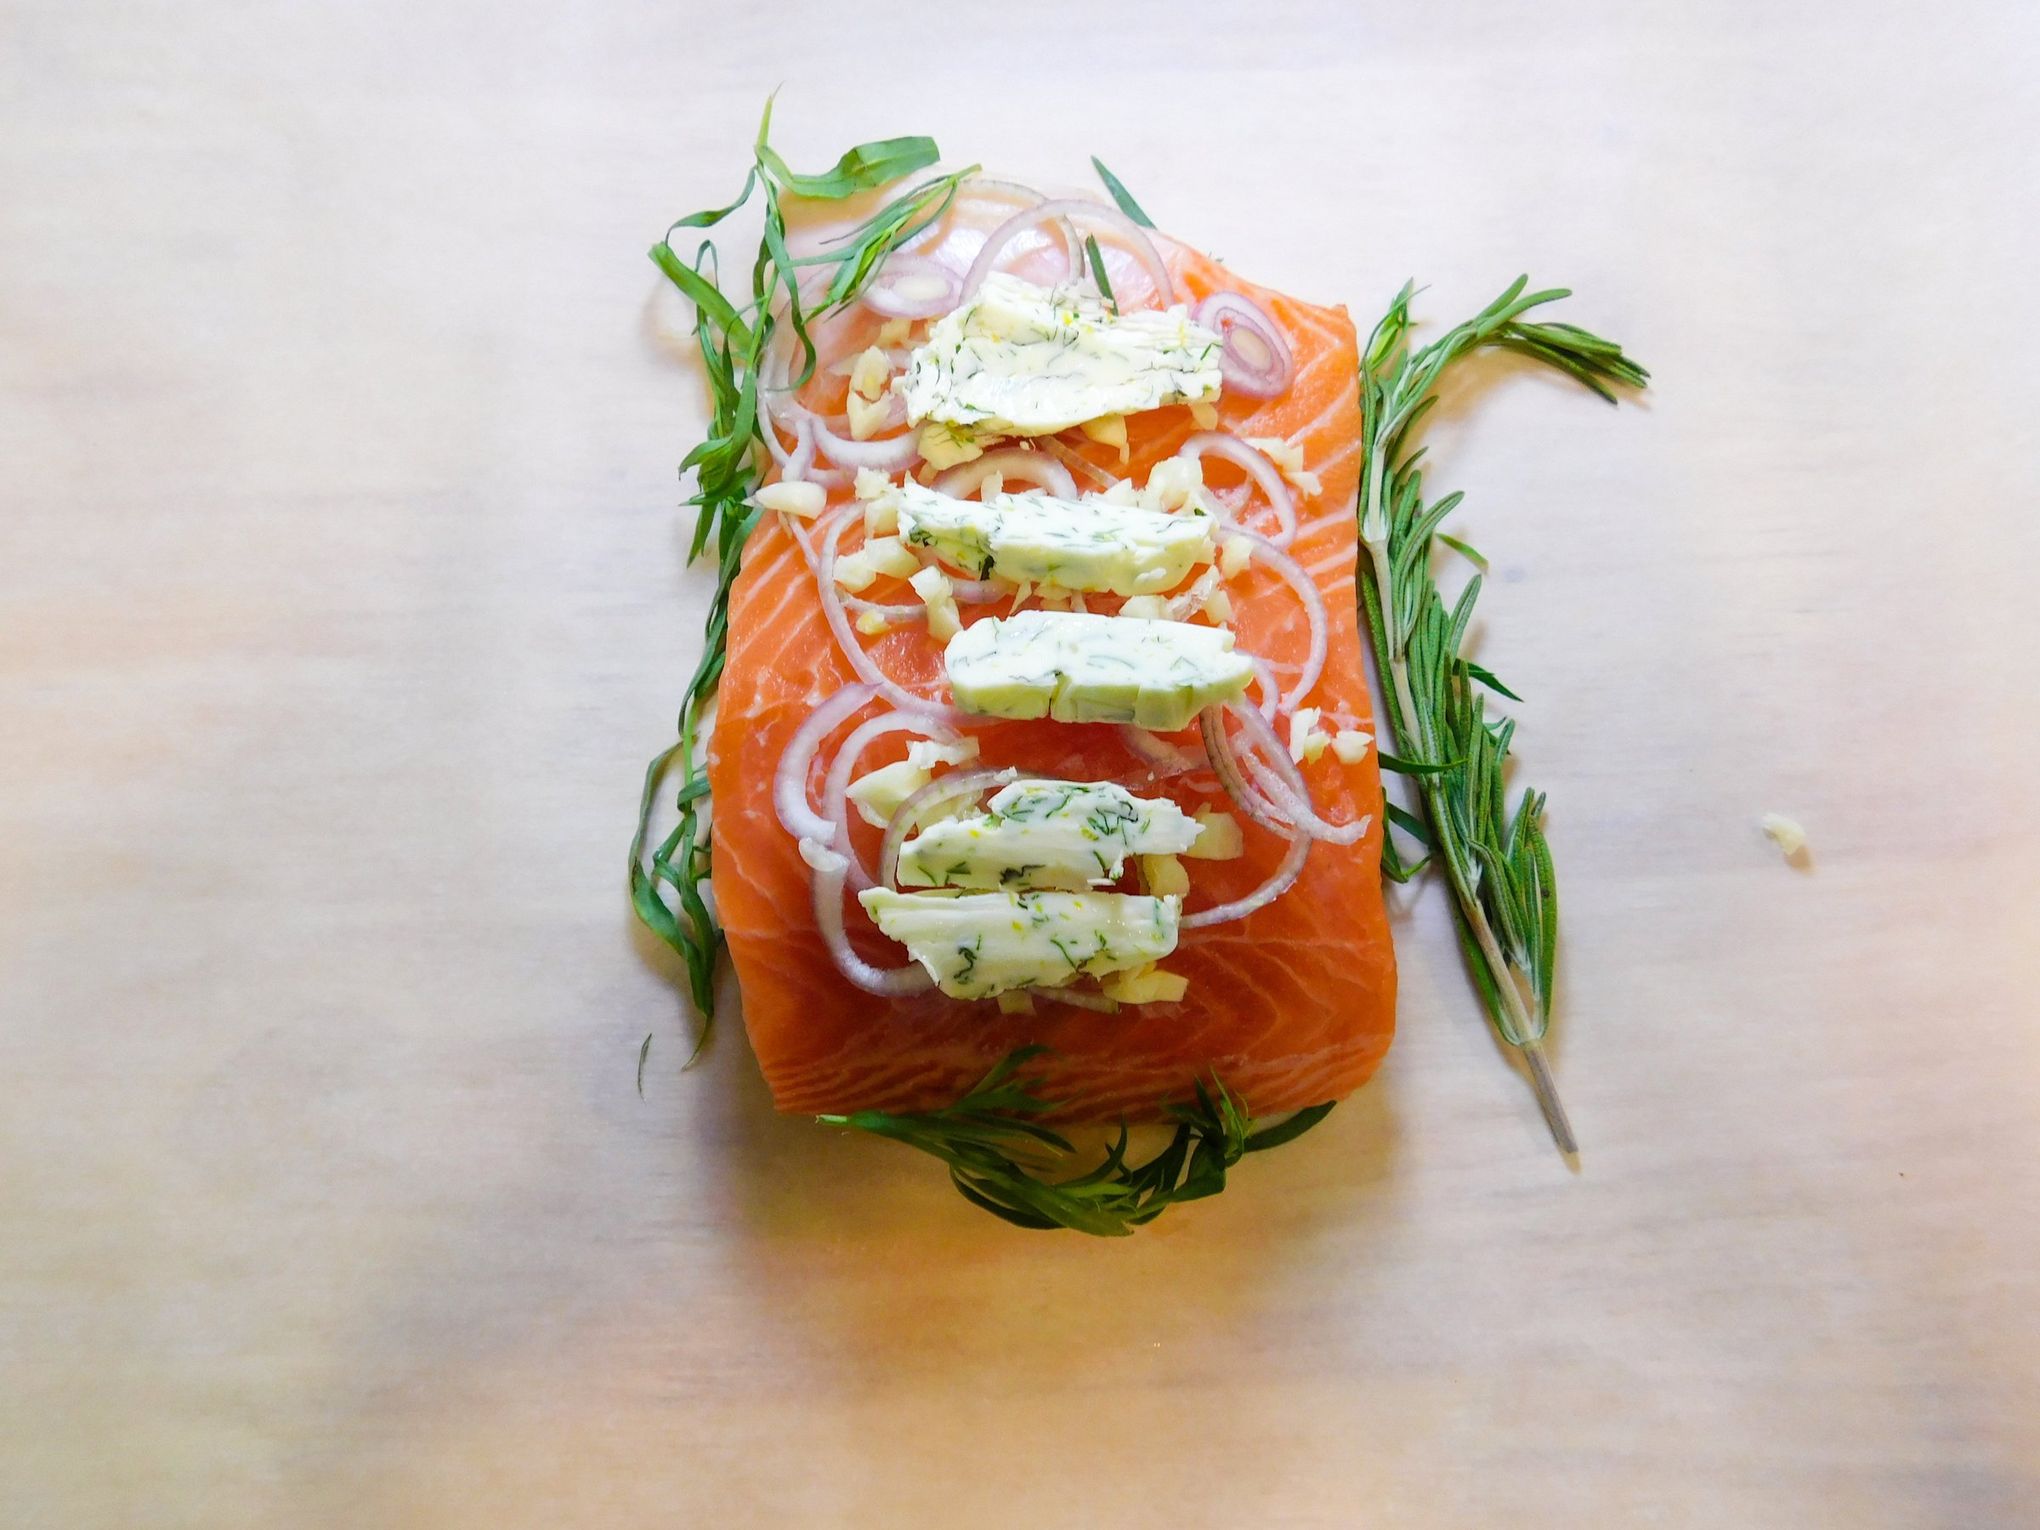 Salmon en papillote makes a perfect, easy weeknight date-night meal